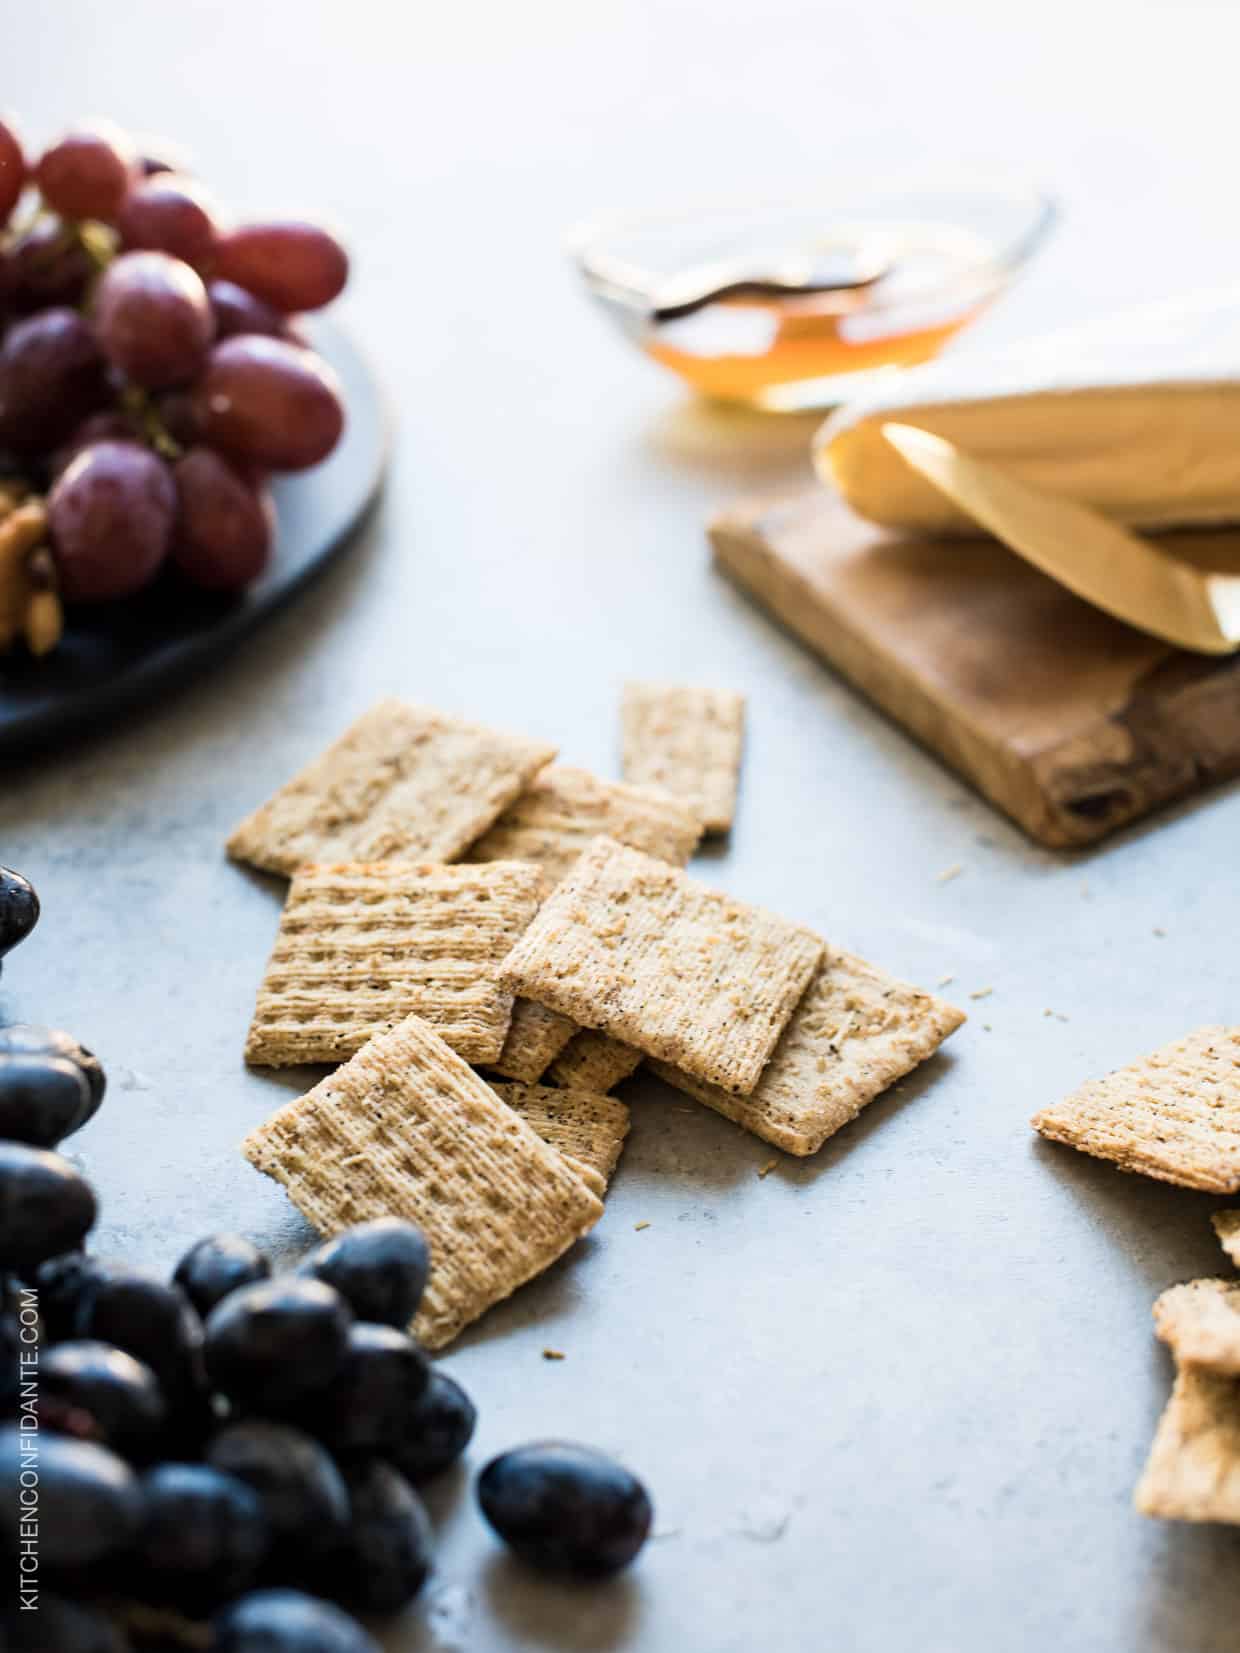 Triscuit crackers and grapes on a rustic surface.